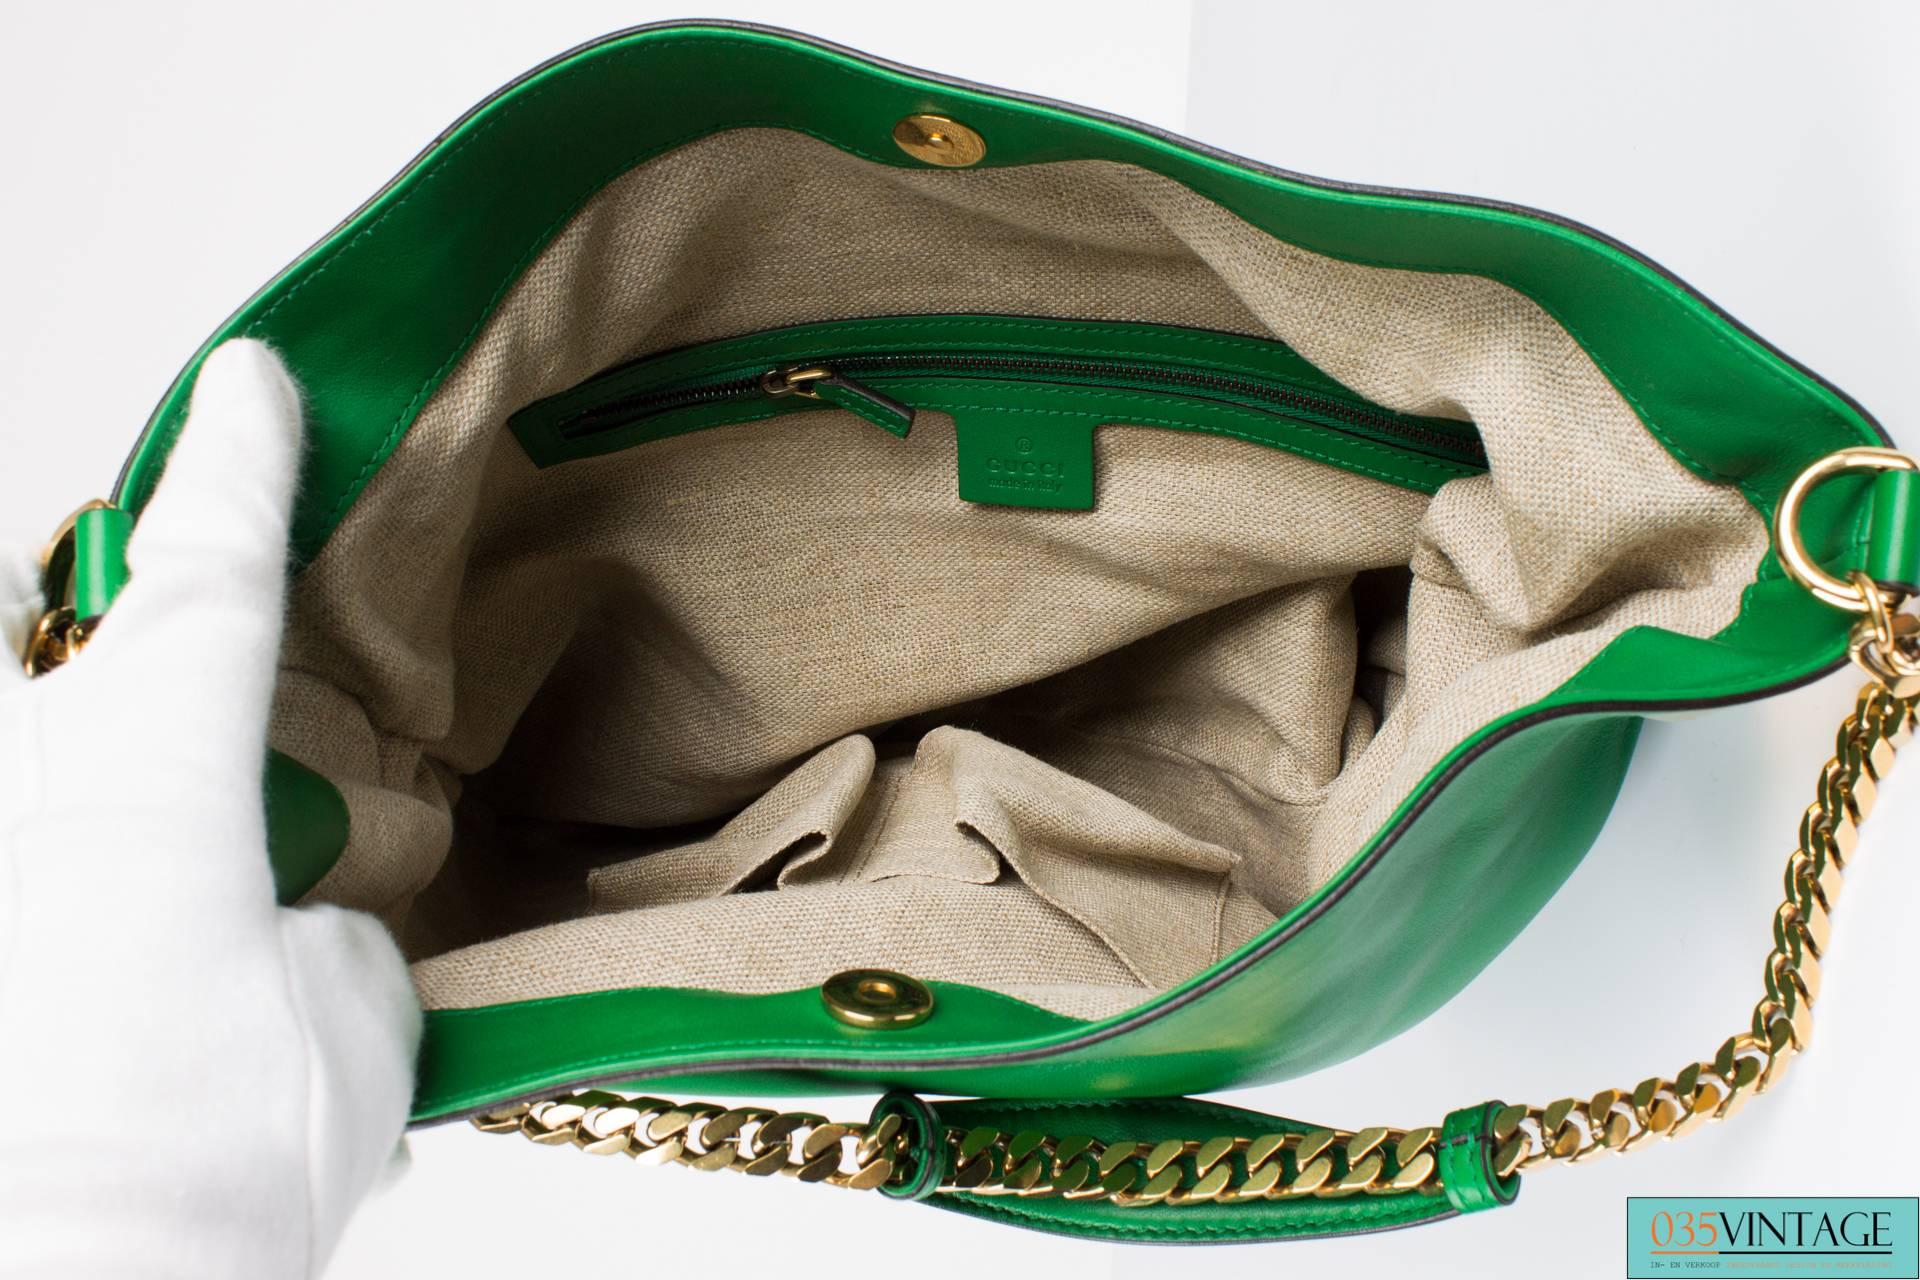 Gucci took inspiration from vintage pieces to create this bag, the seventies to be exactly. A little flare of the 1920's was added with the opulant chain tassel. In 2012 this Gucci 1970 bag was born.

Really really green is the soft en sturdy